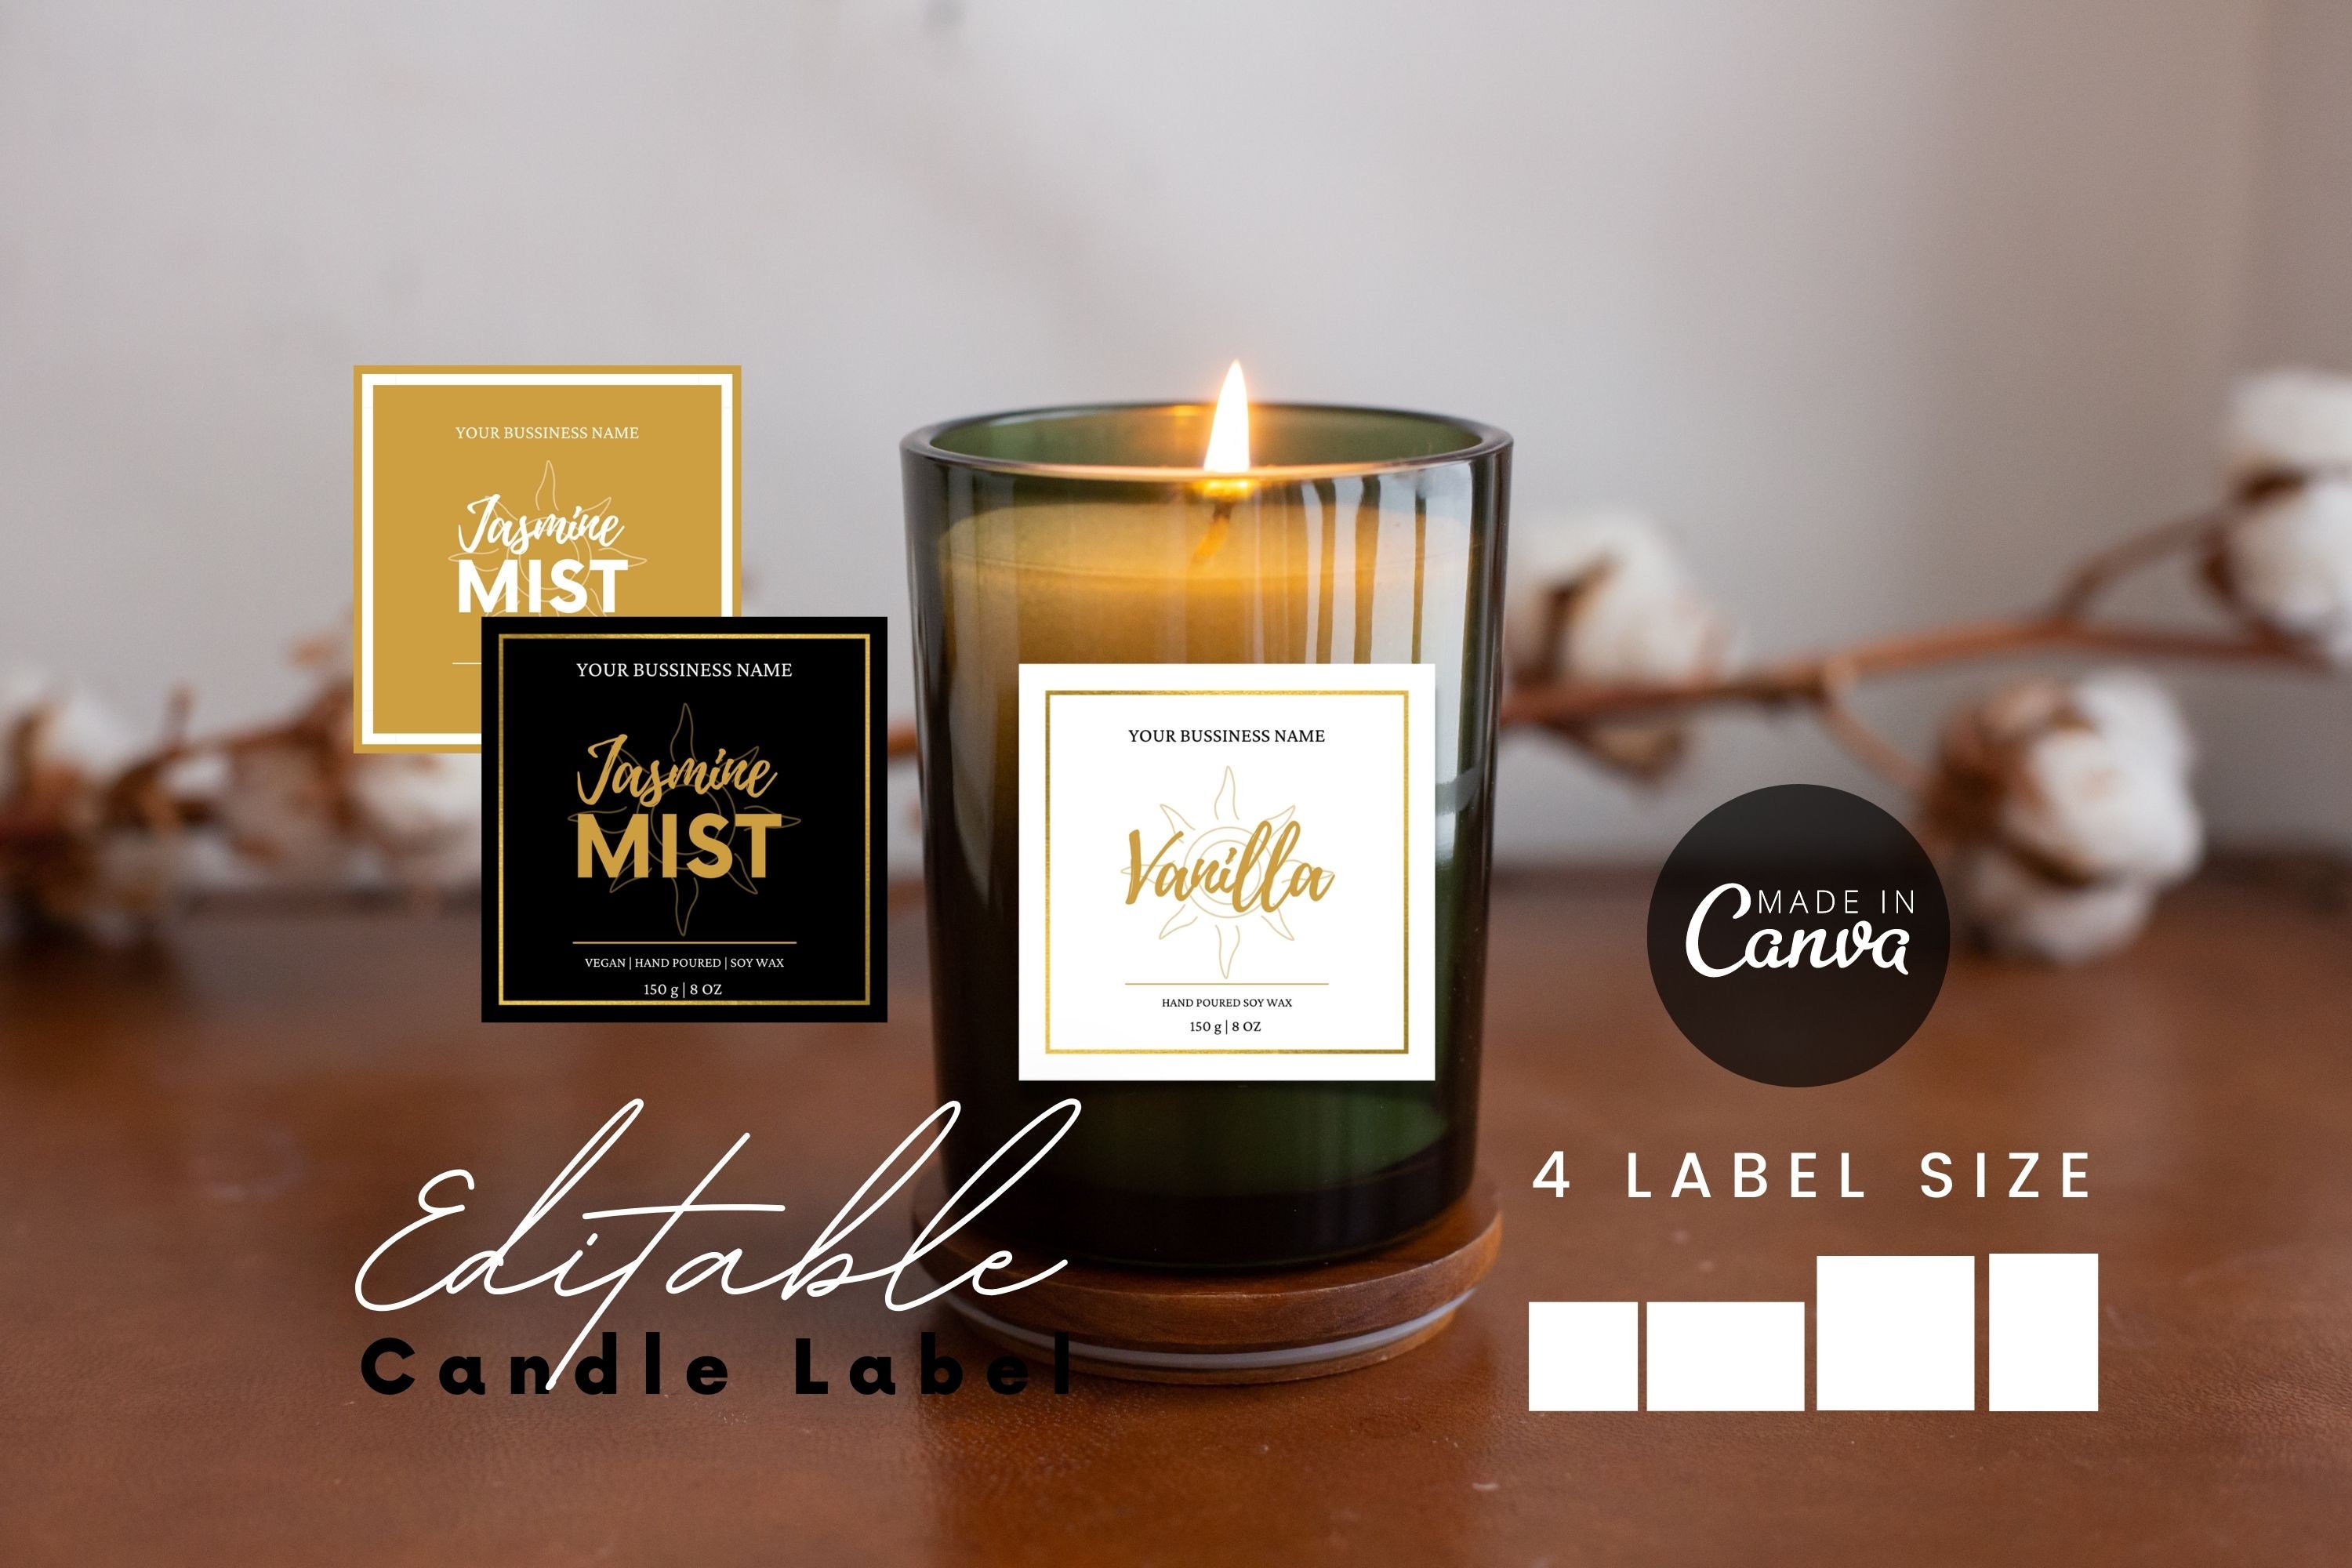 Editable Candle Dust Cover Template, Printable Candle Dust Covers